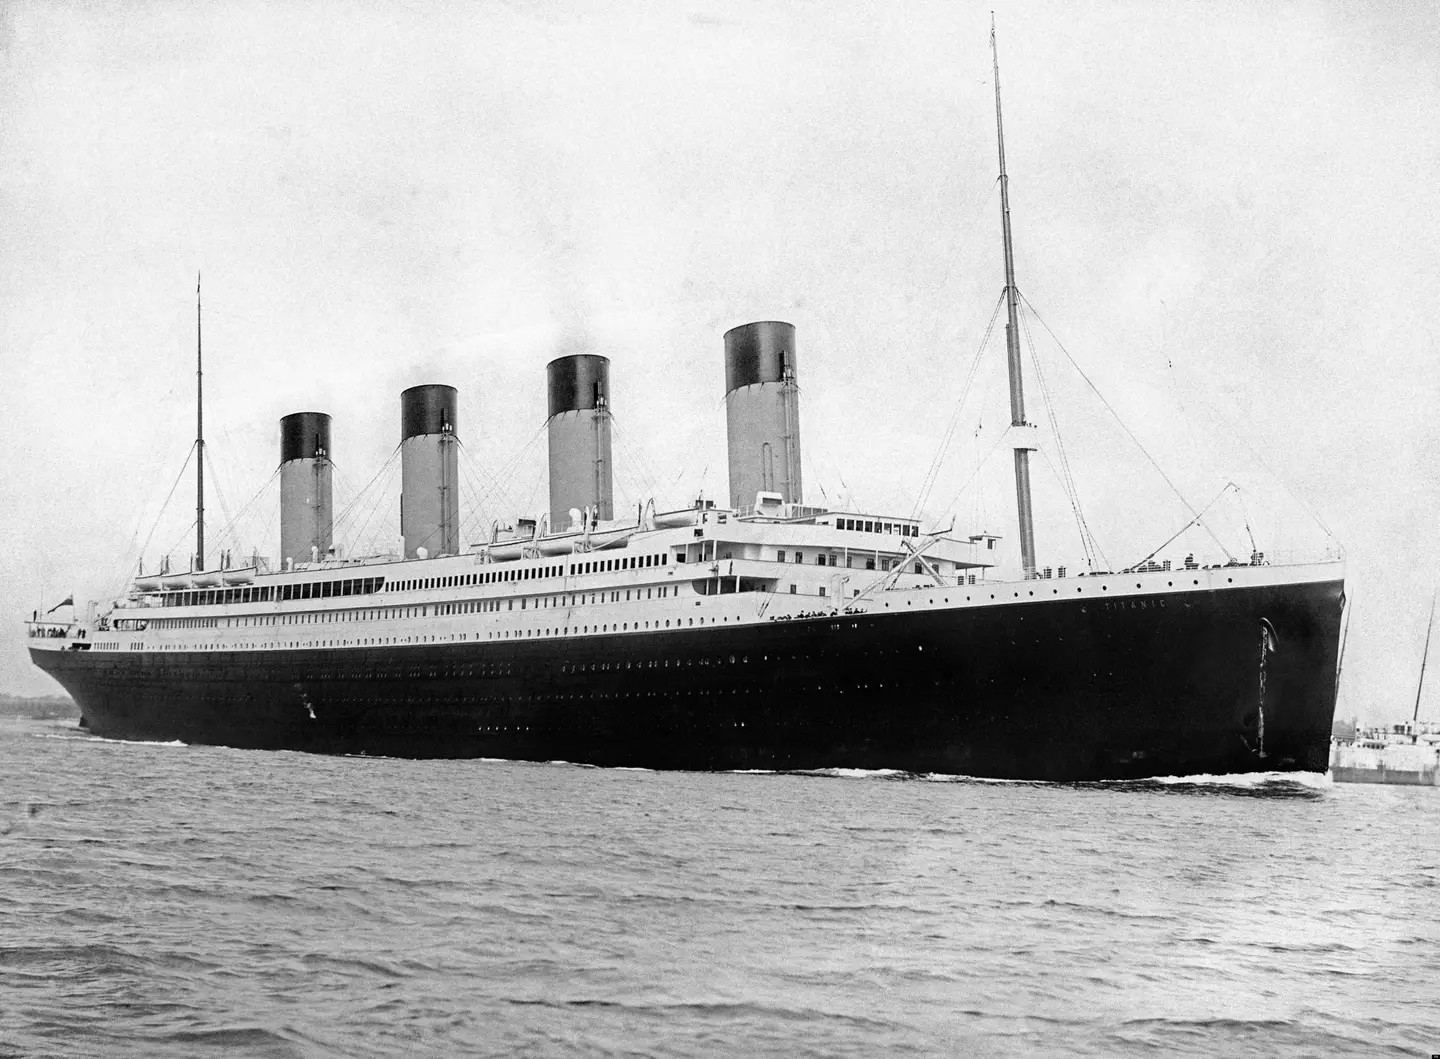 The Titanic was famously deemed 'unsinkable'.